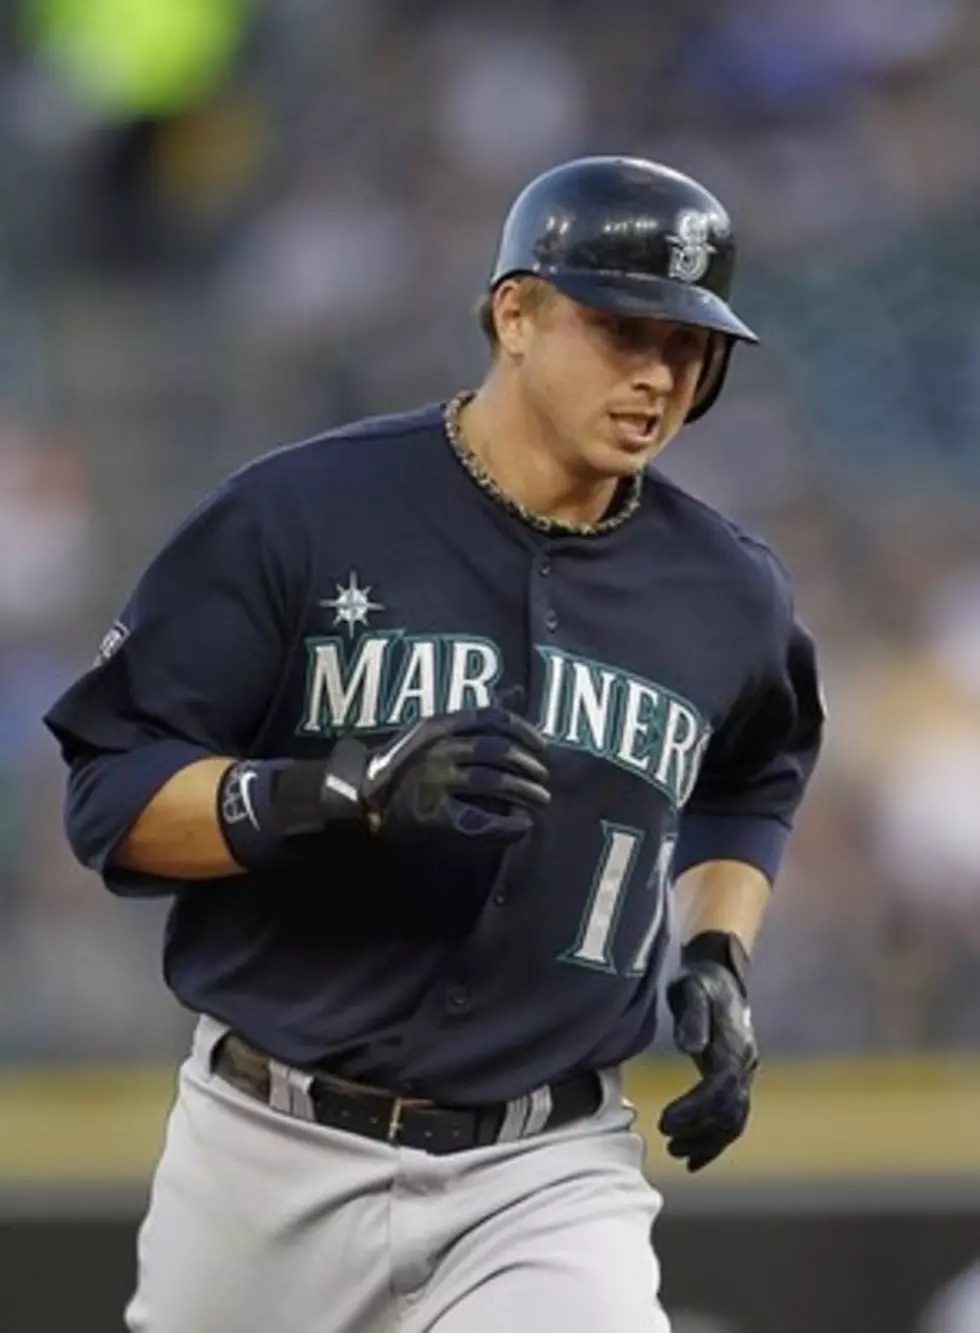 Seattle Mariners Scores 2 in the 8th to Sink the Texas Rangers 4-3